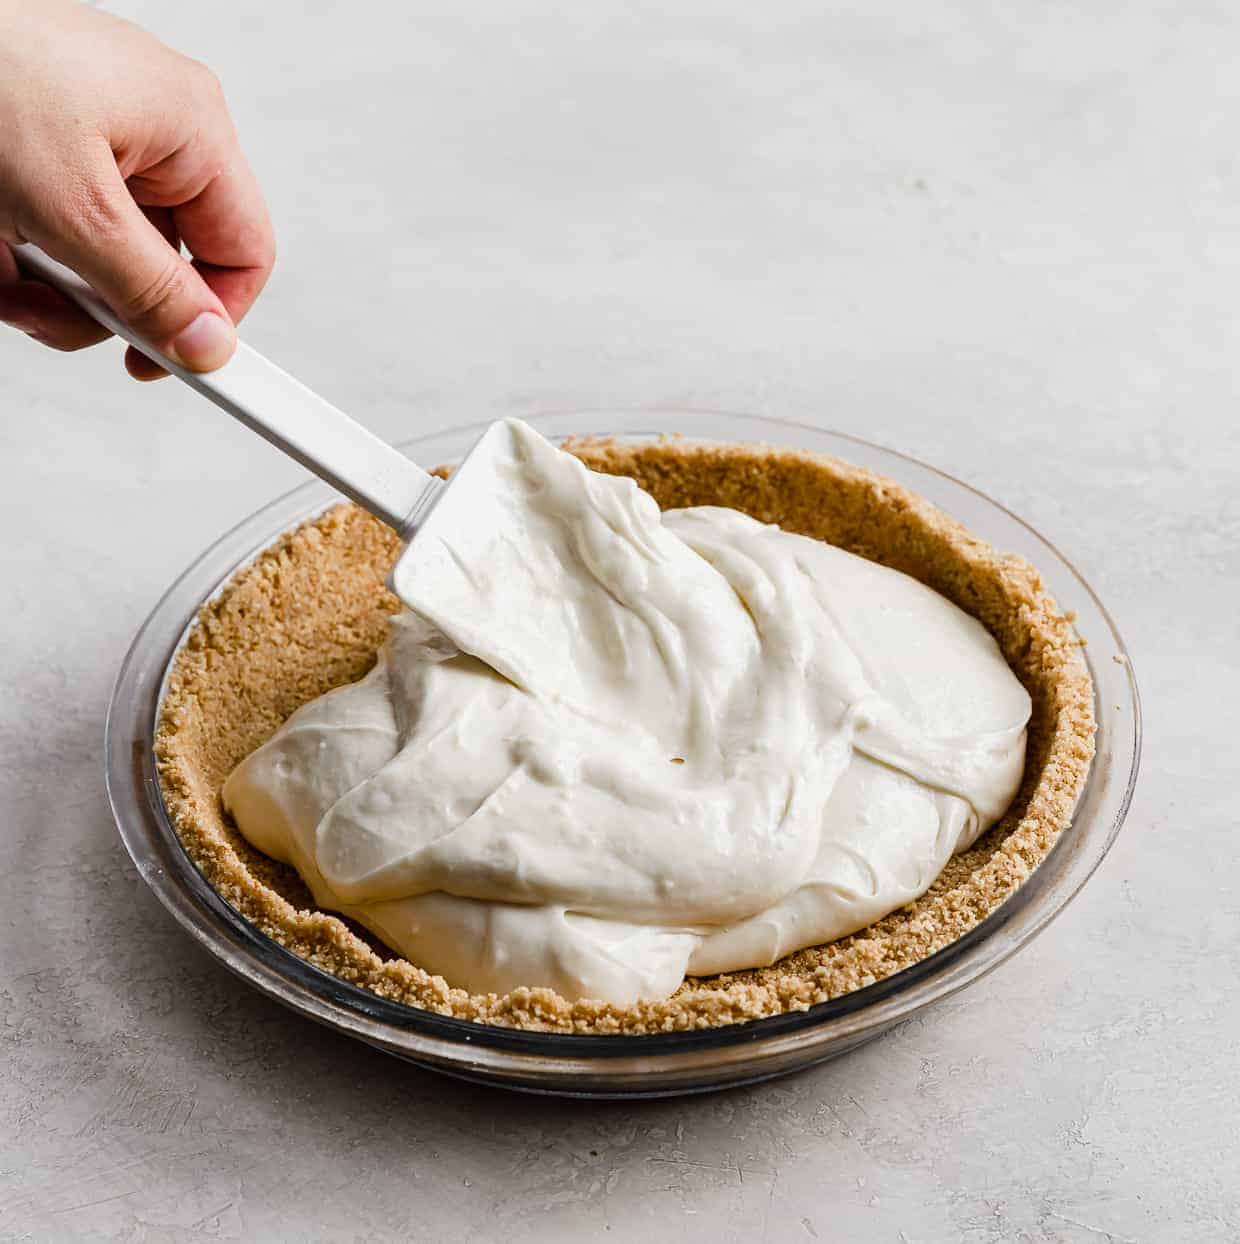 A hand holding a spatula that is spreading the cheesecake filling inside a graham cracker pie crust.